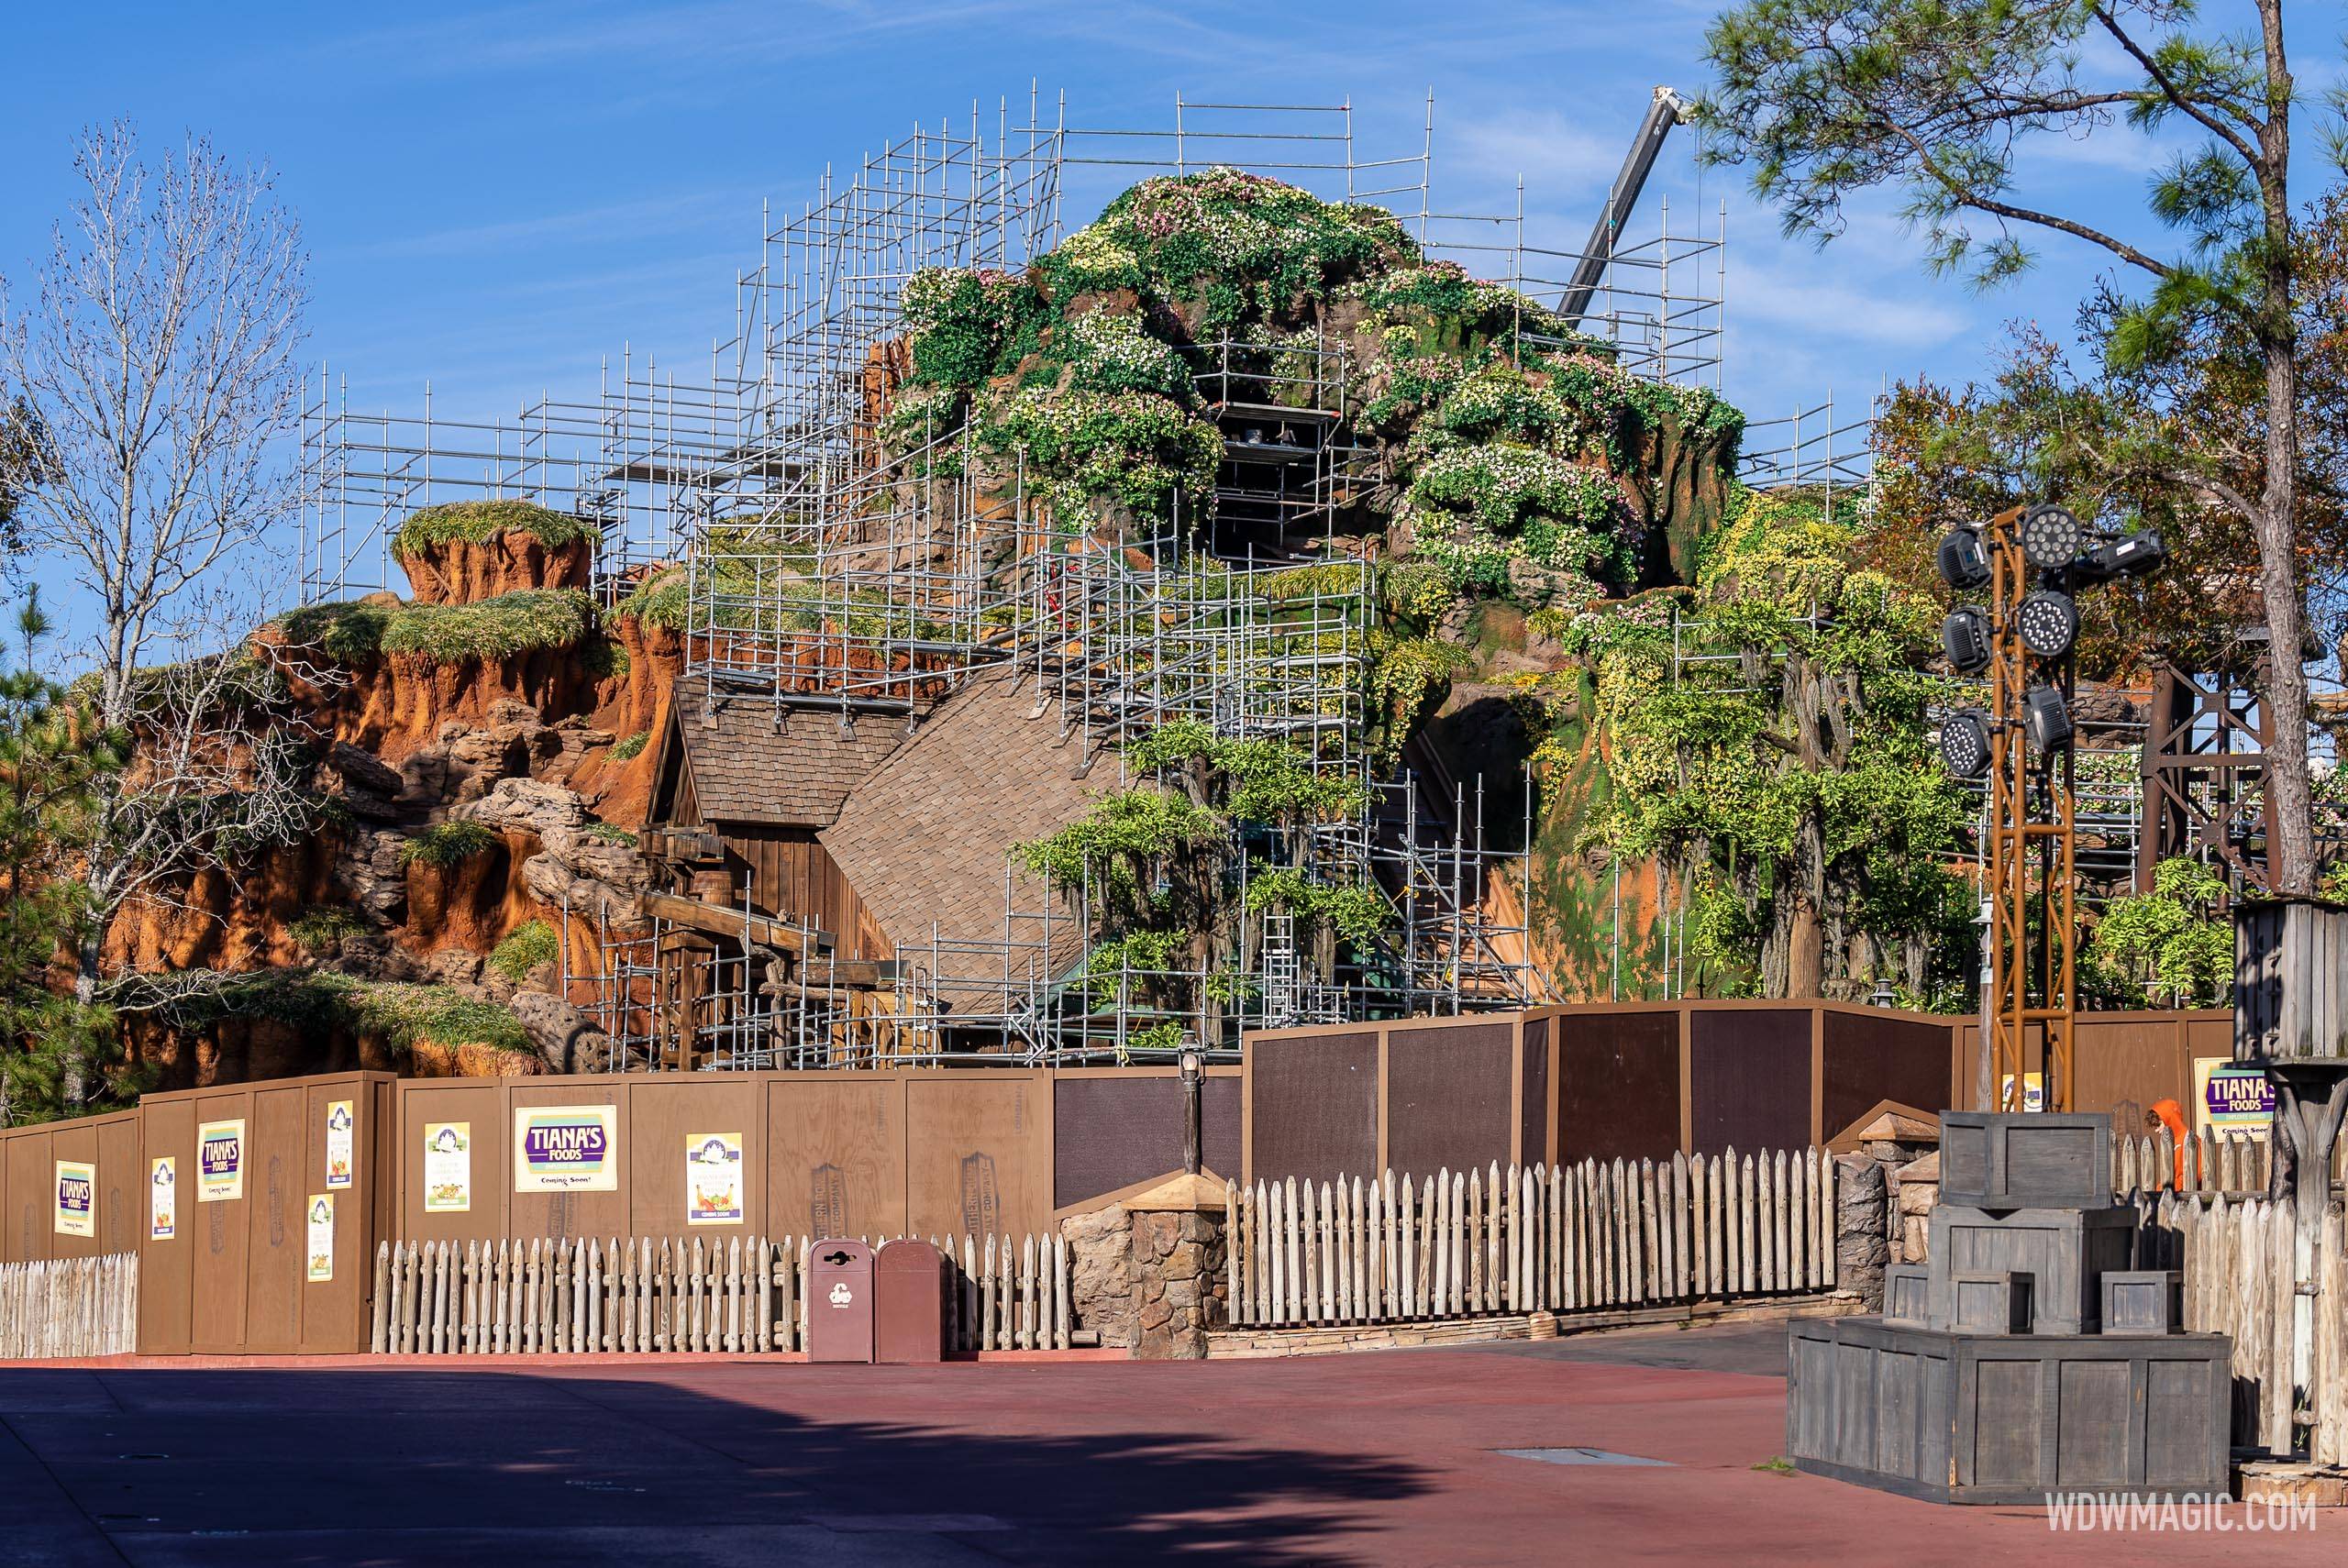 More scaffolding removed from Tiana's Bayou Adventure at Walt Disney World